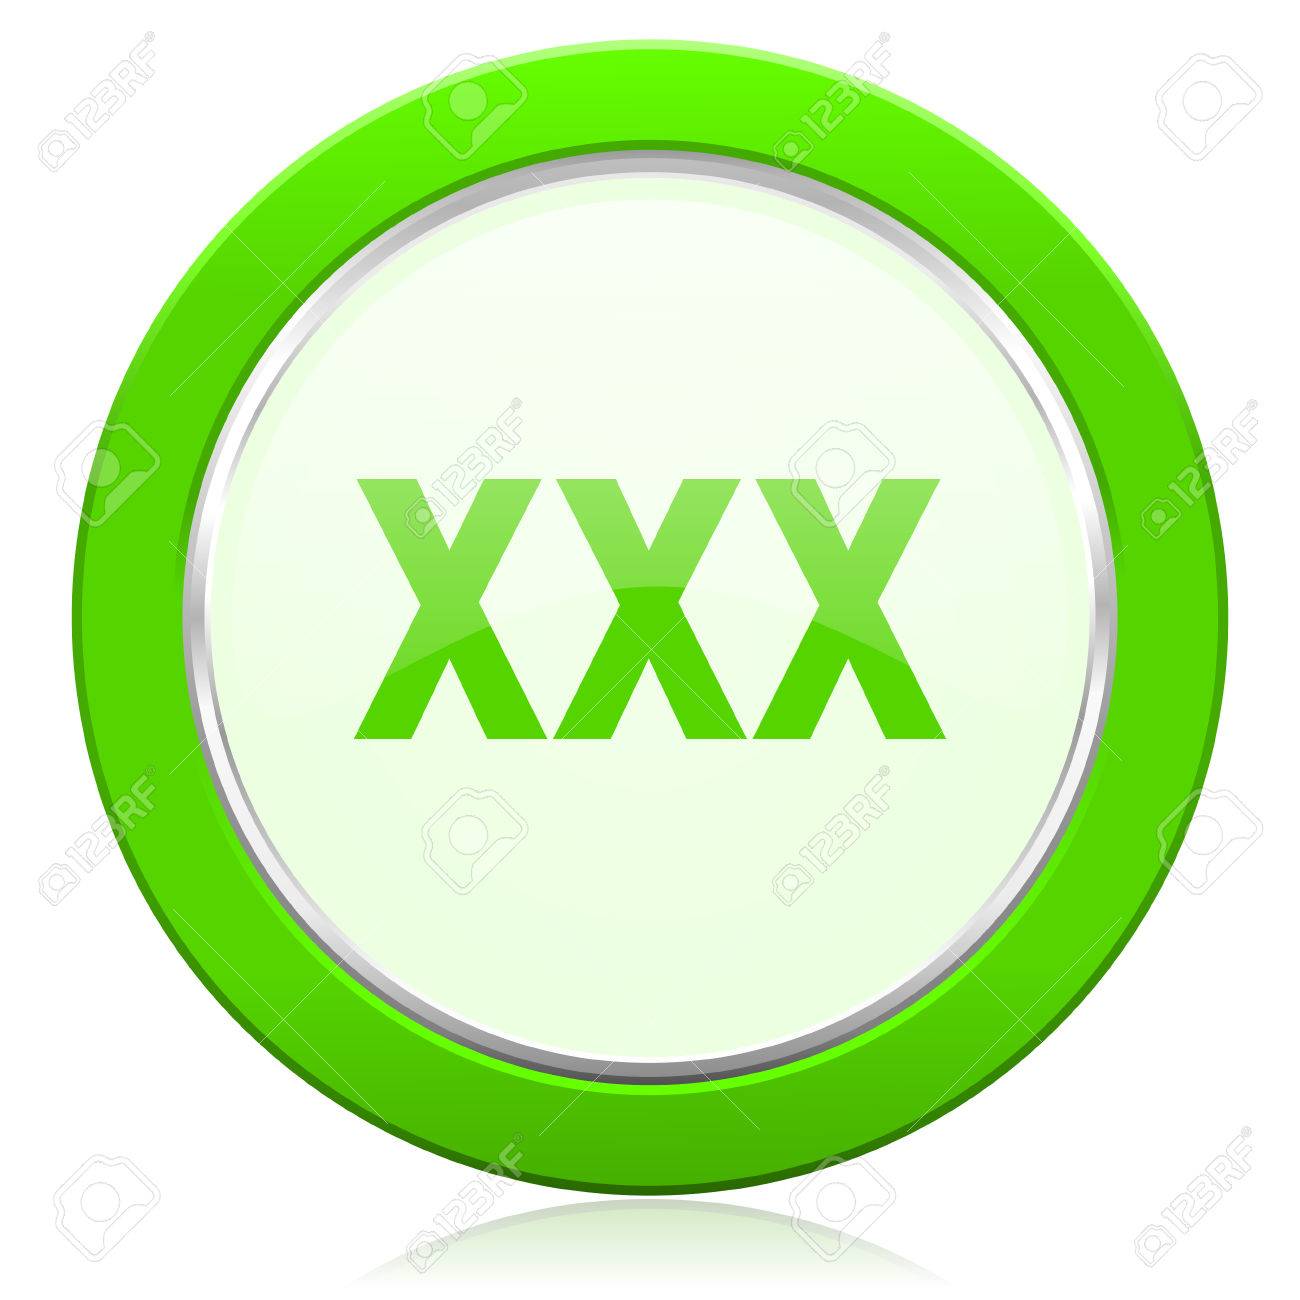 xxx icon porn sign stock photo picture and royalty free image